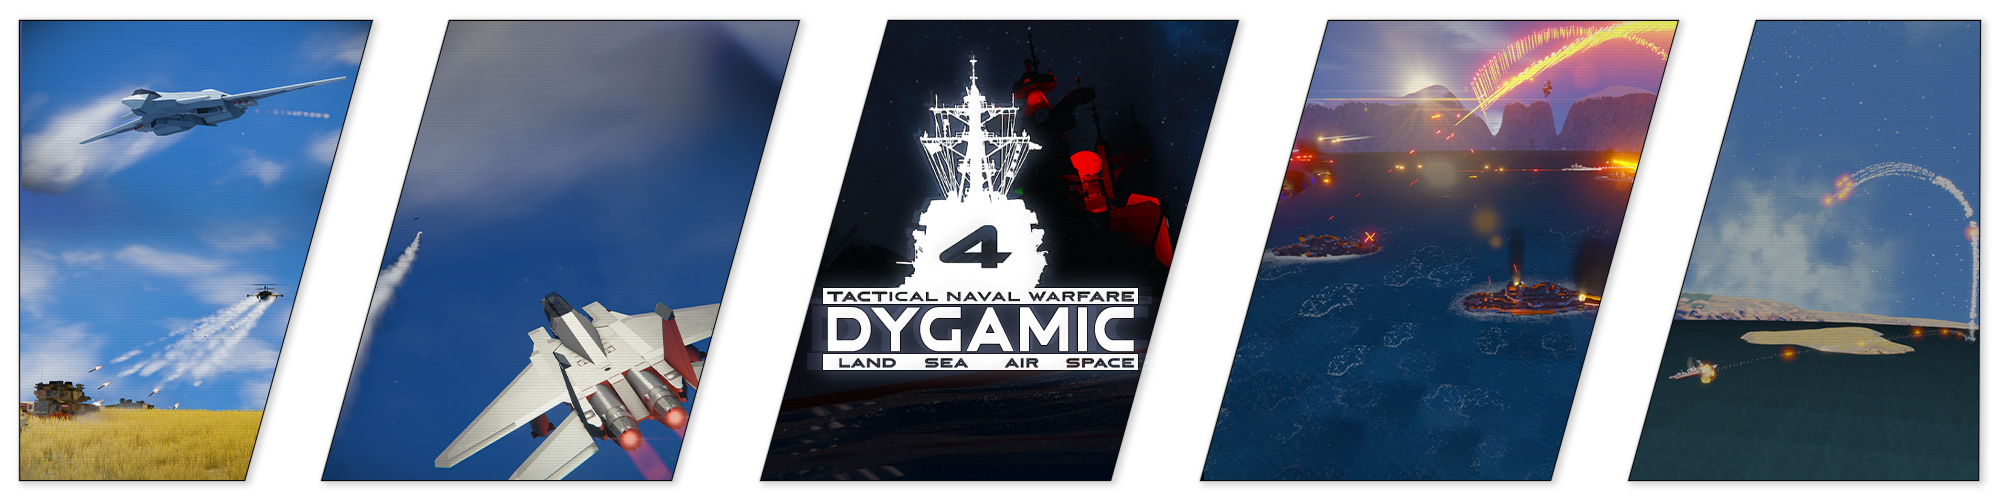 dygamics4bannercanvas.png